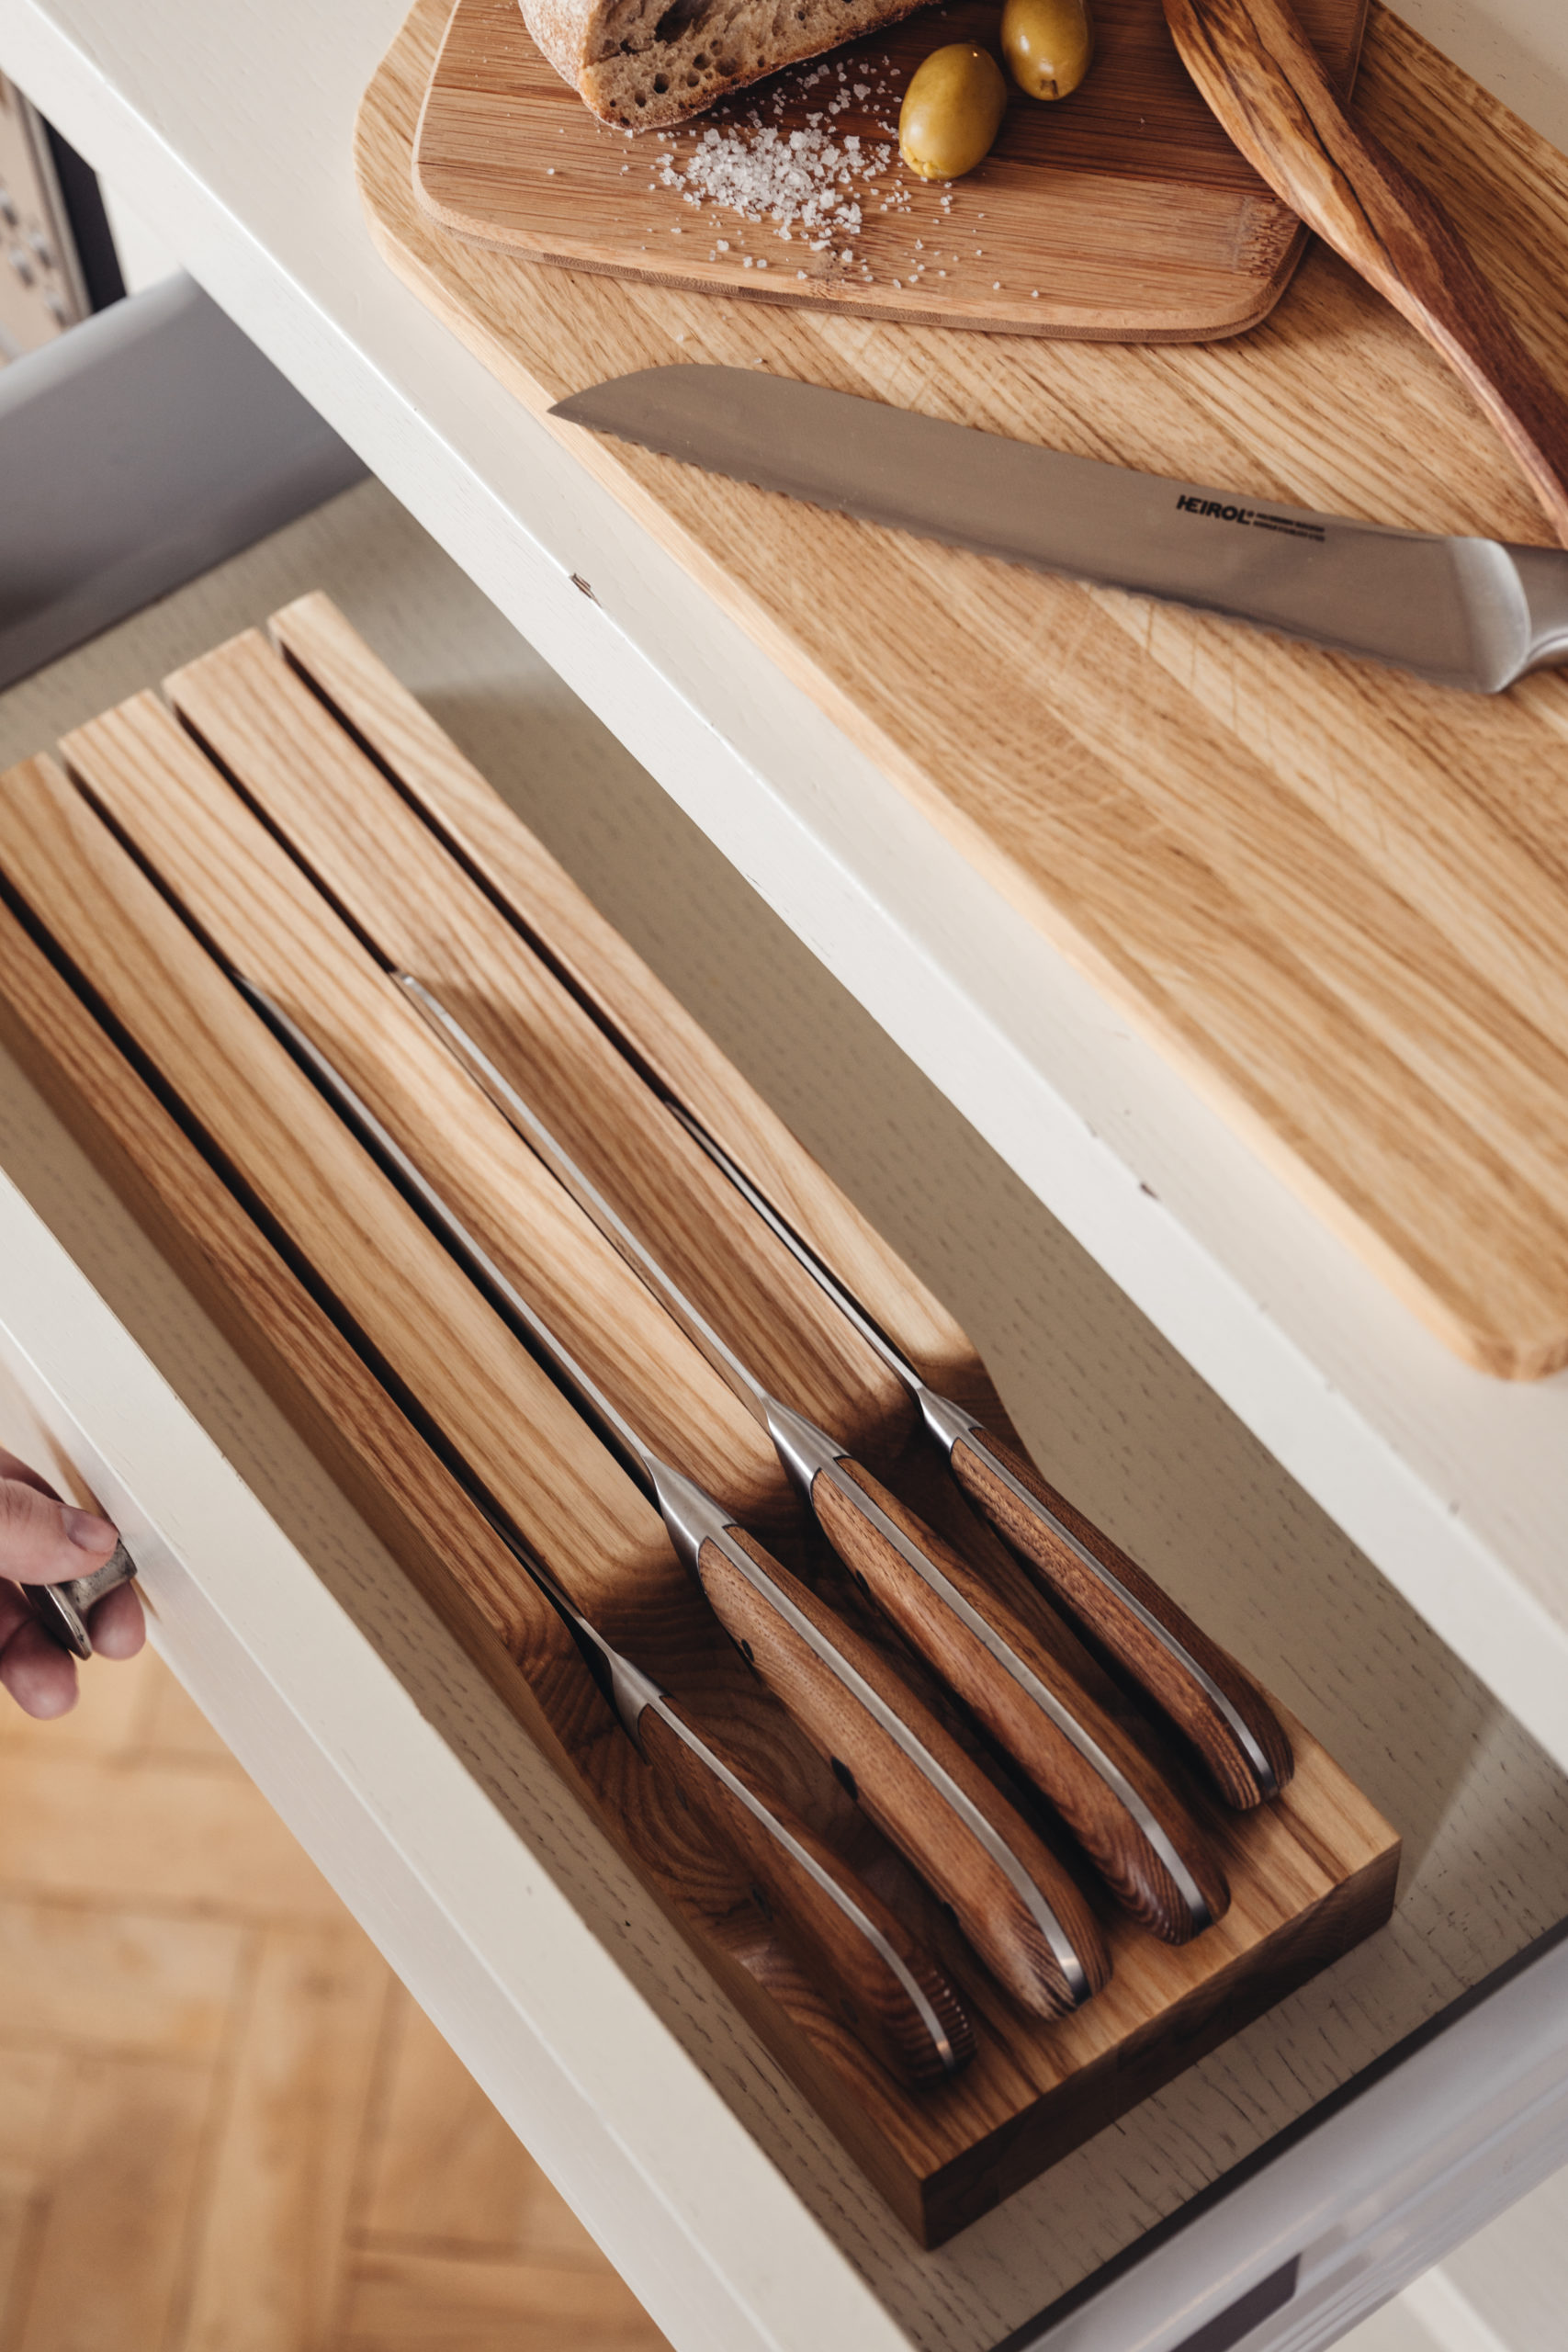 Wooden kitchenware   a hygienic, ecological, and sensible choice ...